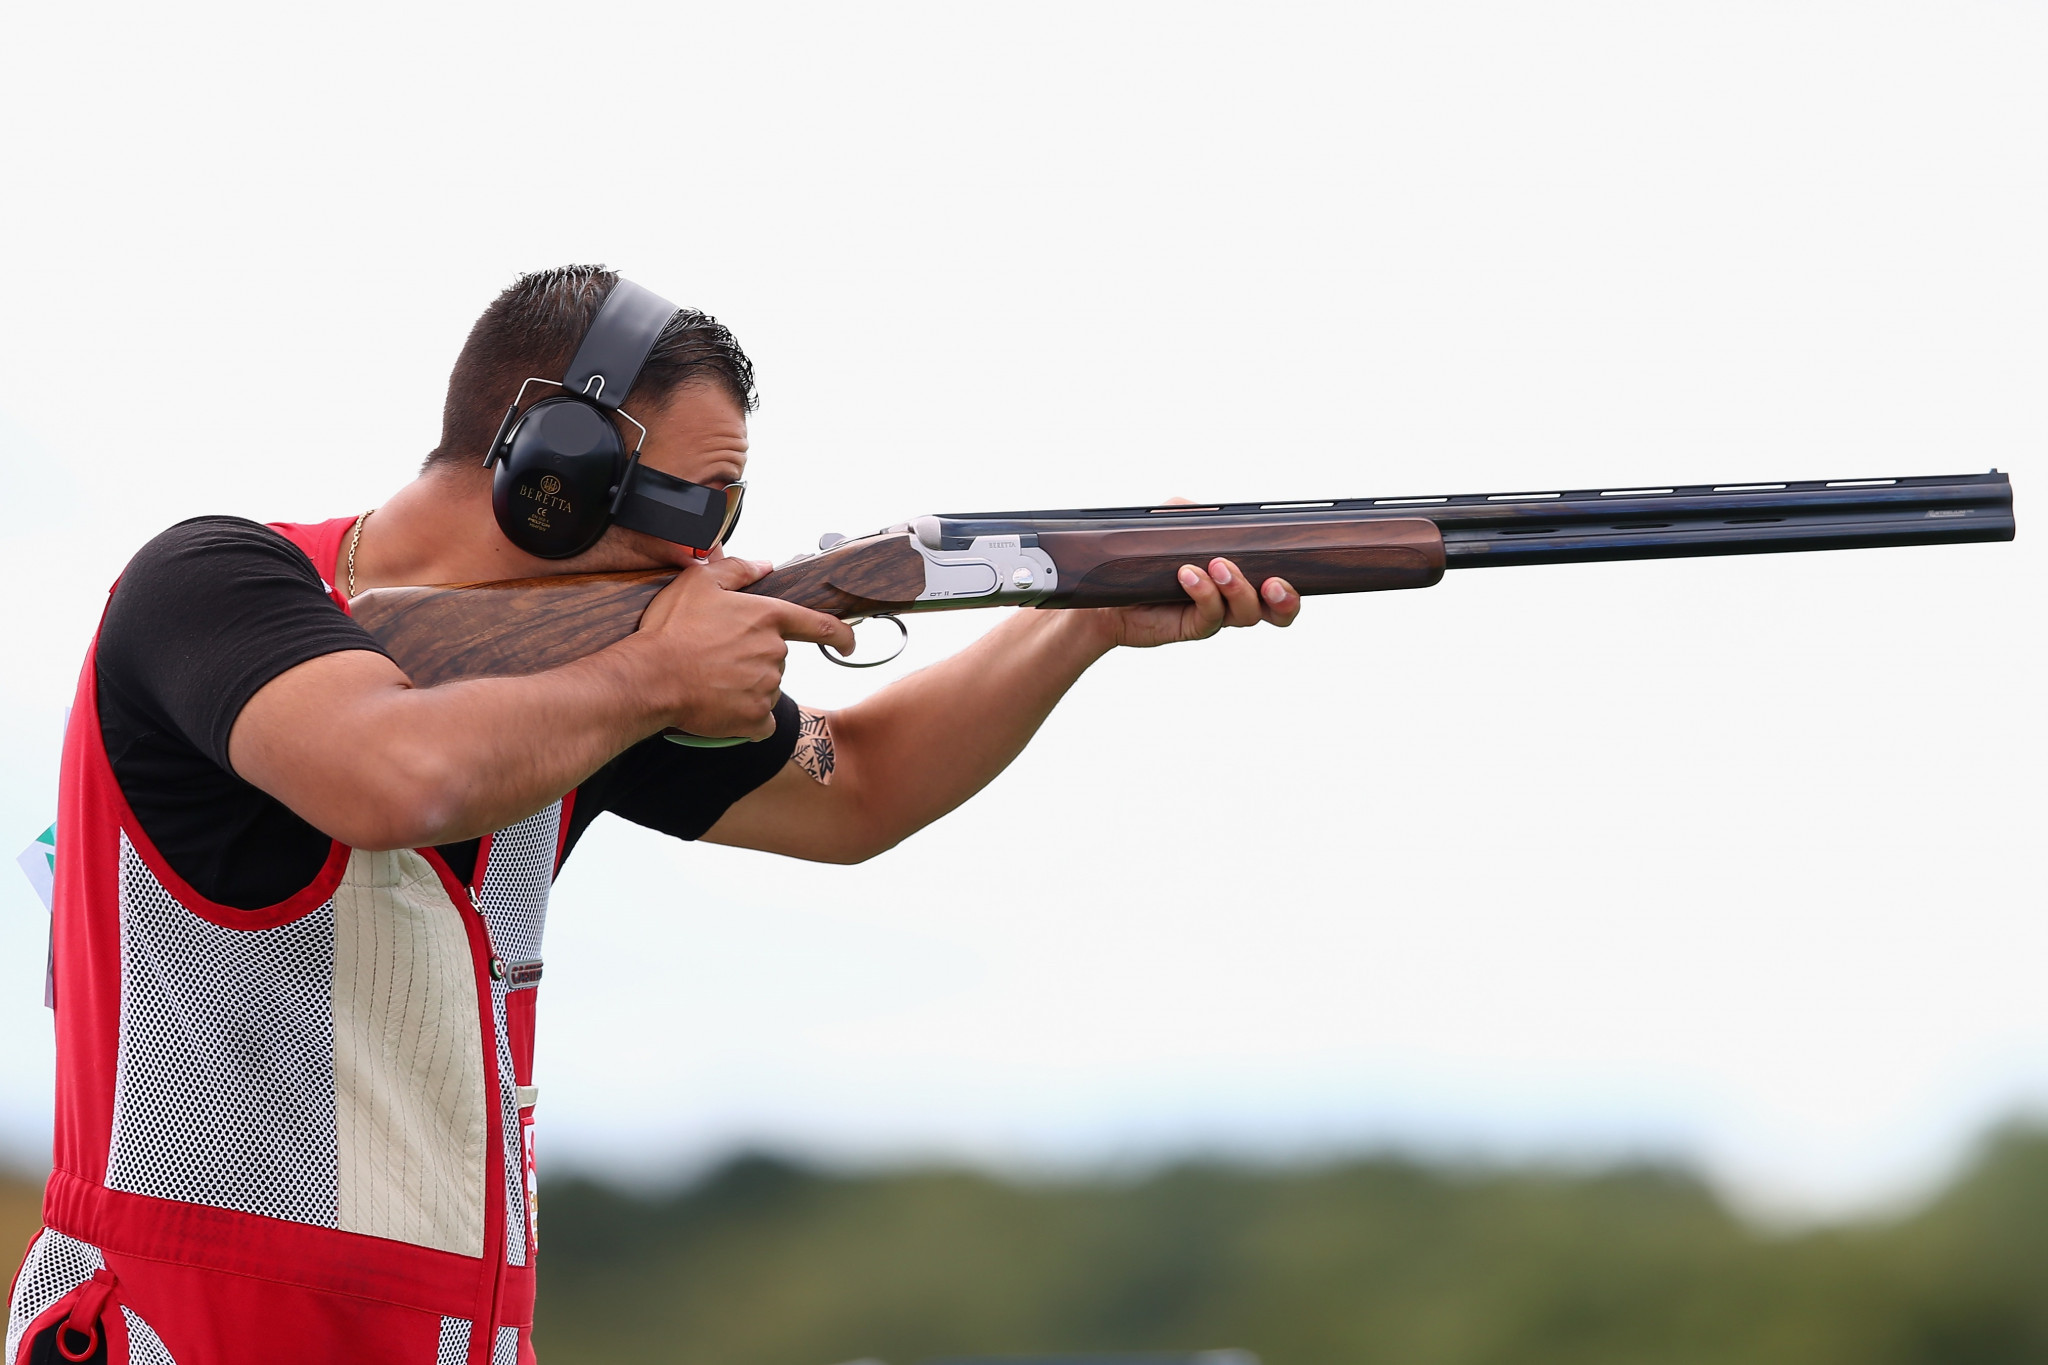 England's Heading secures men's trap title in Gold Coast 2018 test event